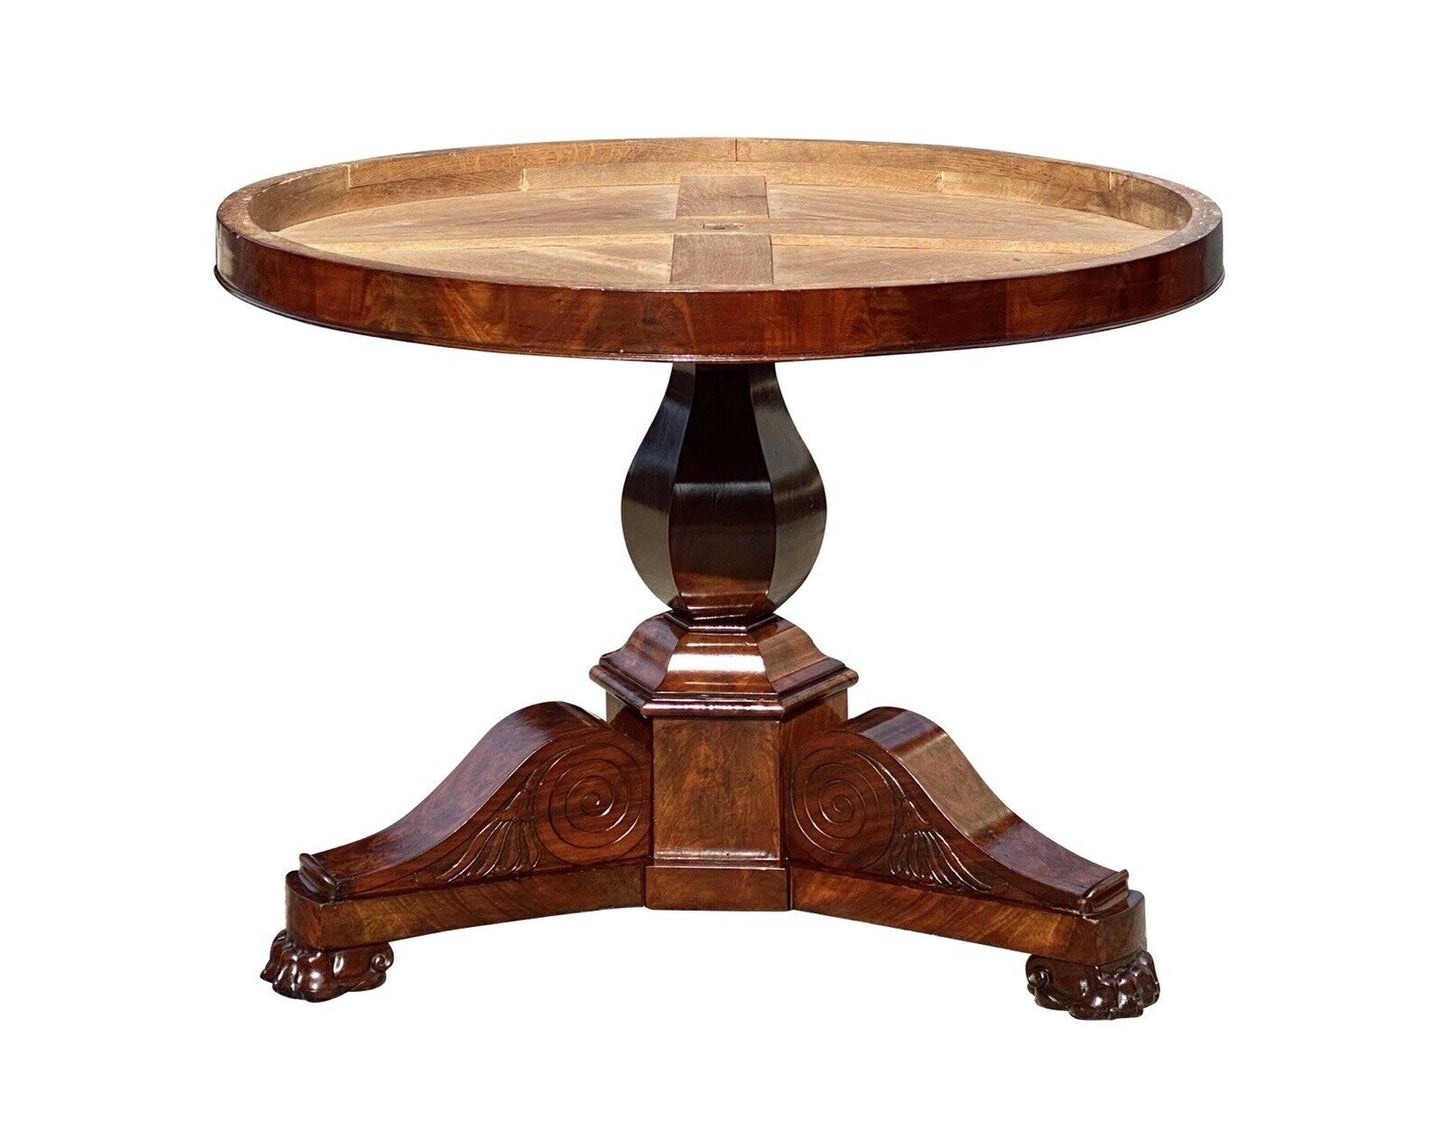 19th C Antique Mahogany Round Empire Parlor Table With Onyx Dish Top